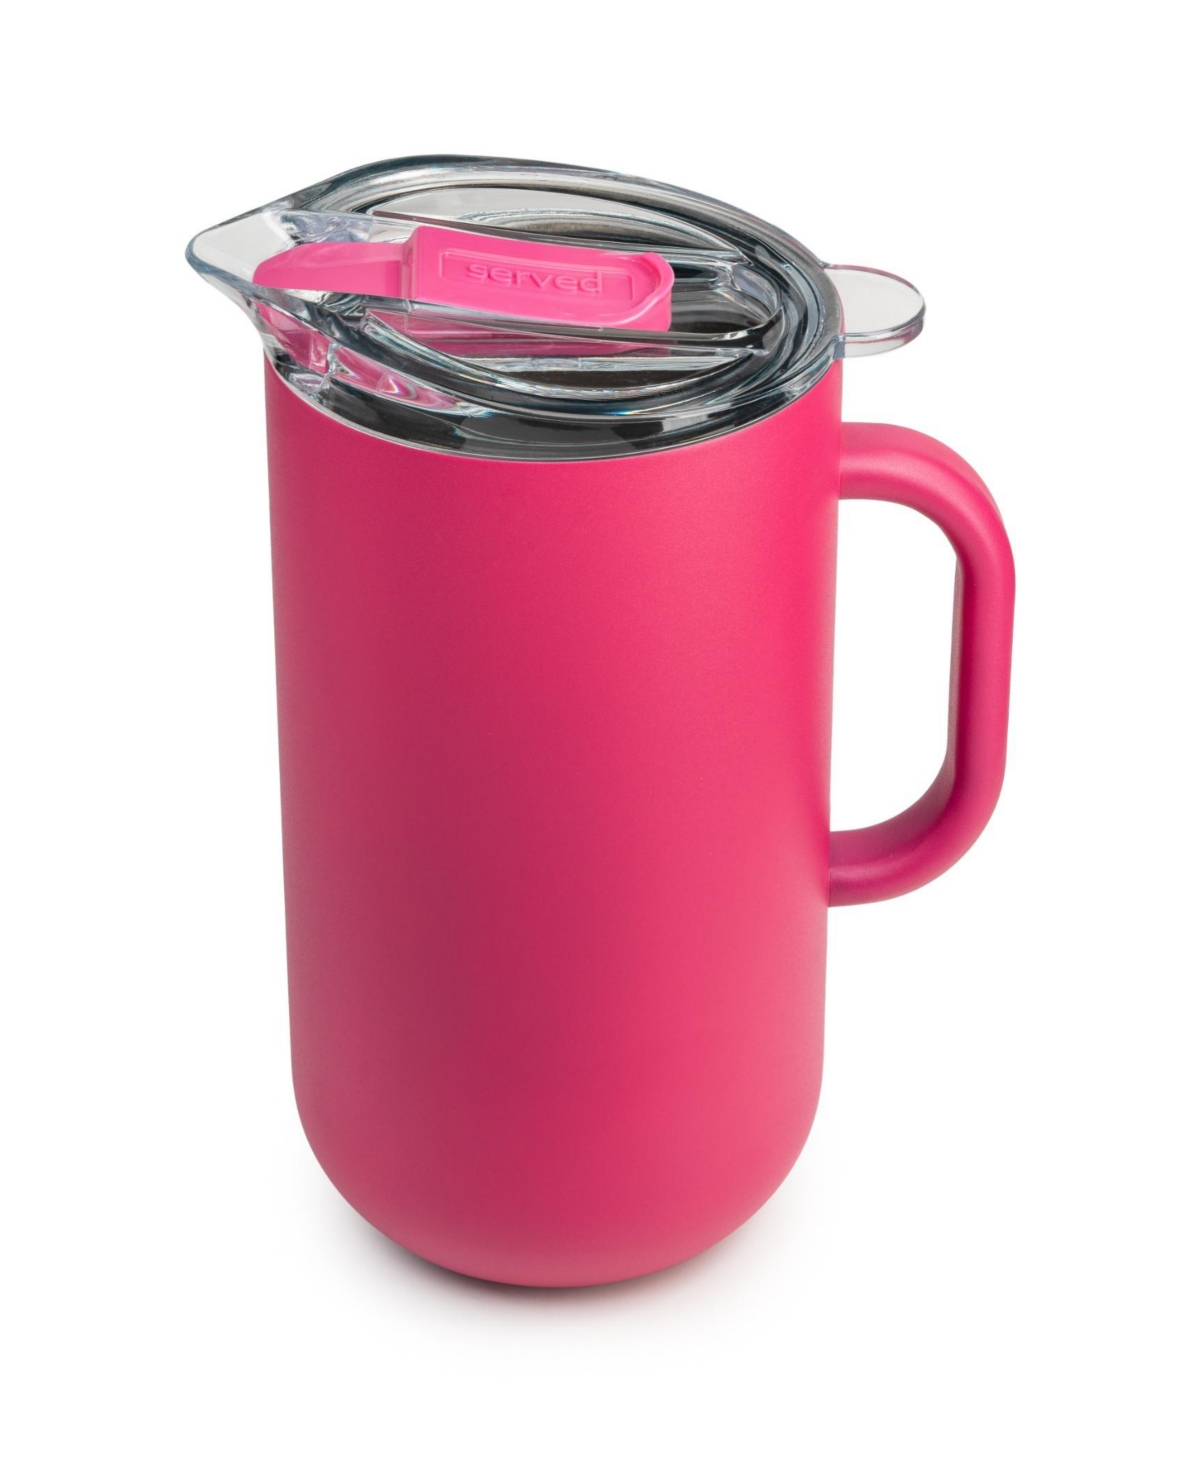 Shop Served Vacuum-insulated Double-walled Copper-lined Stainless Steel Pitcher, 2 Liter In Watermelon